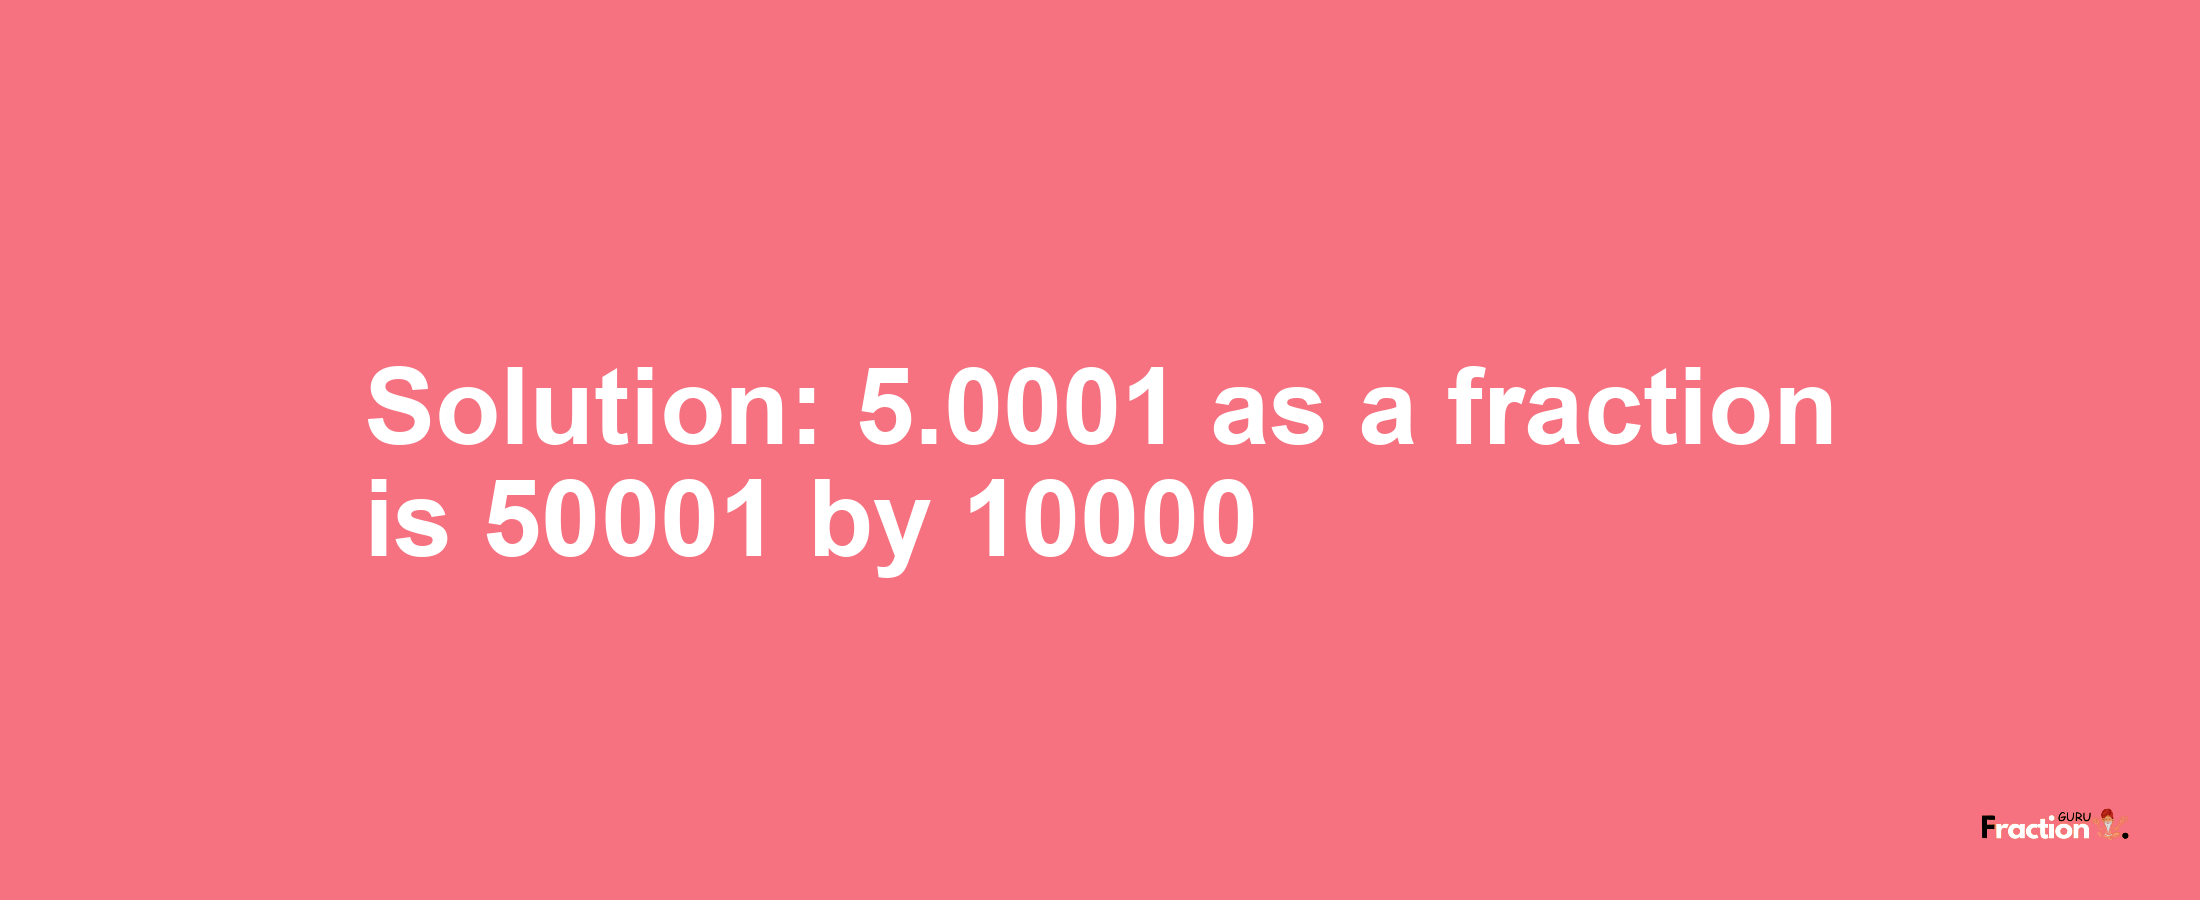 Solution:5.0001 as a fraction is 50001/10000